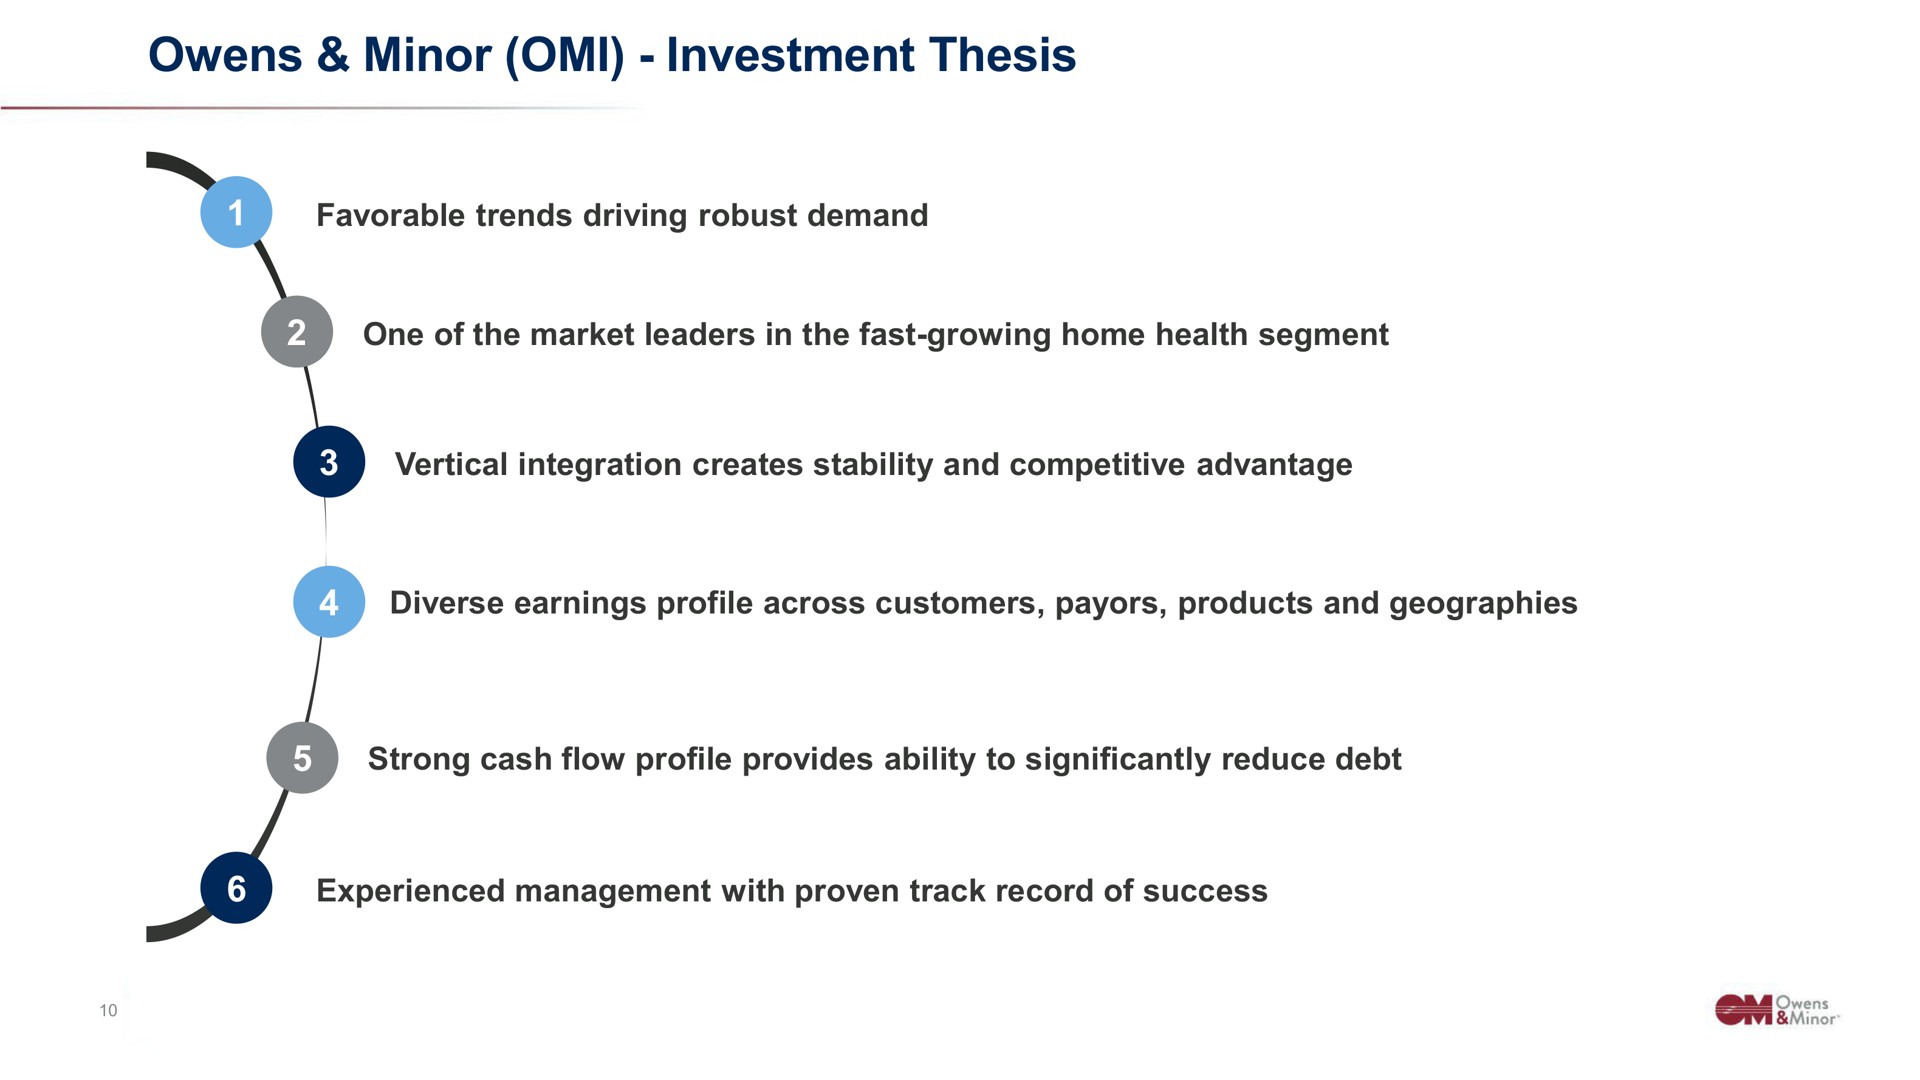 minor investment thesis | Owens&Minor